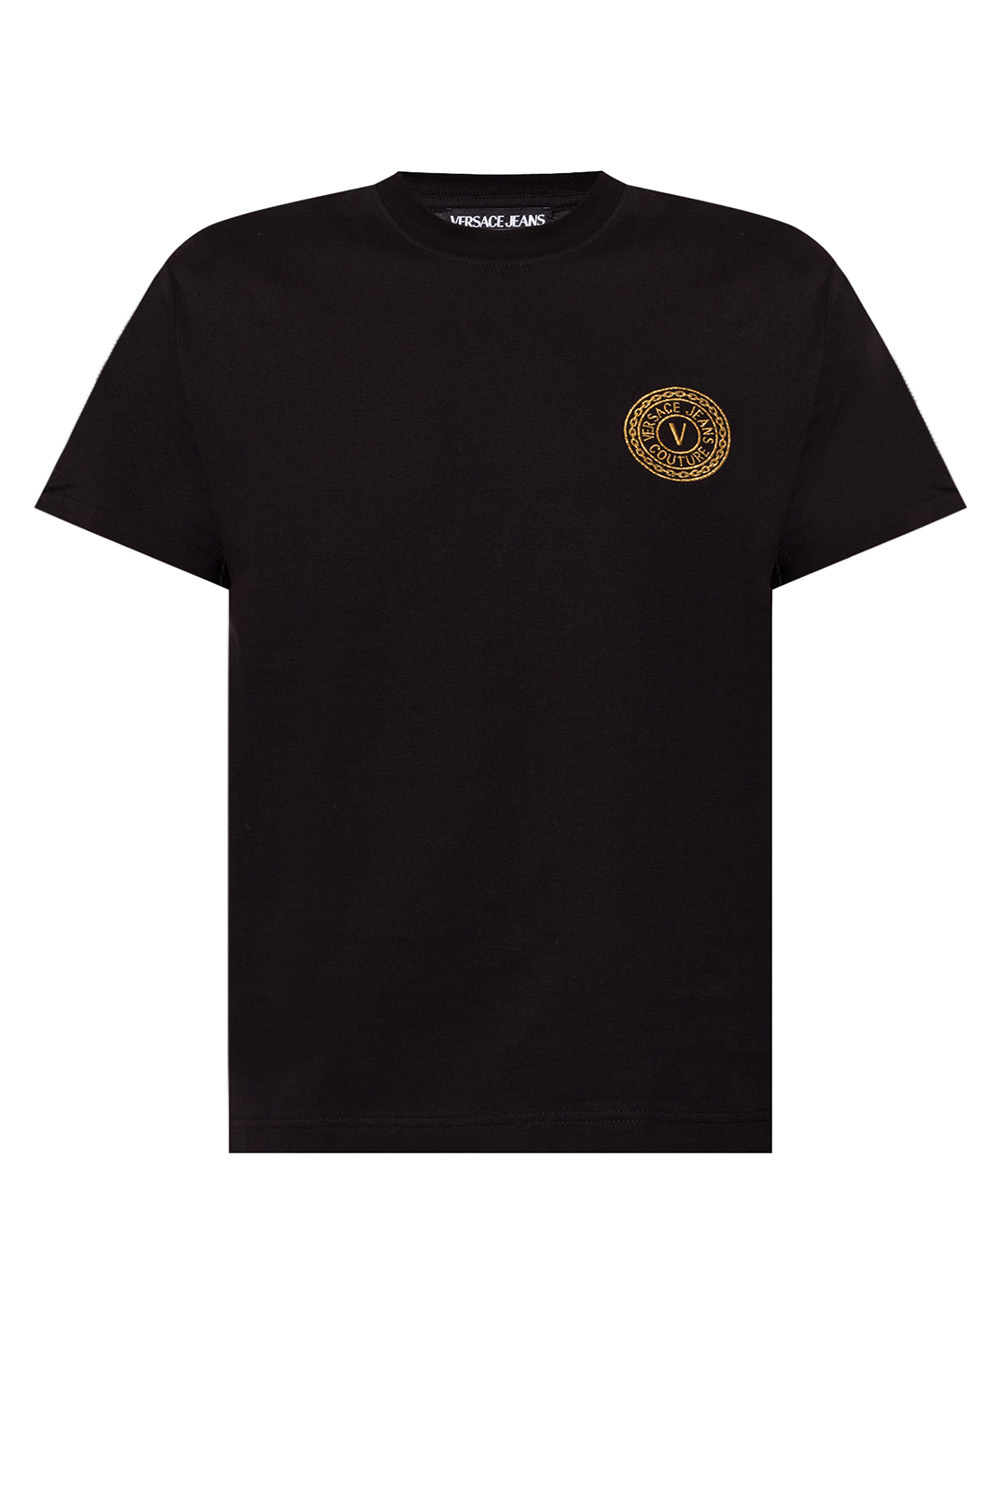 Versace Jeans Couture T-shirt with logo | Men's Clothing | IetpShops